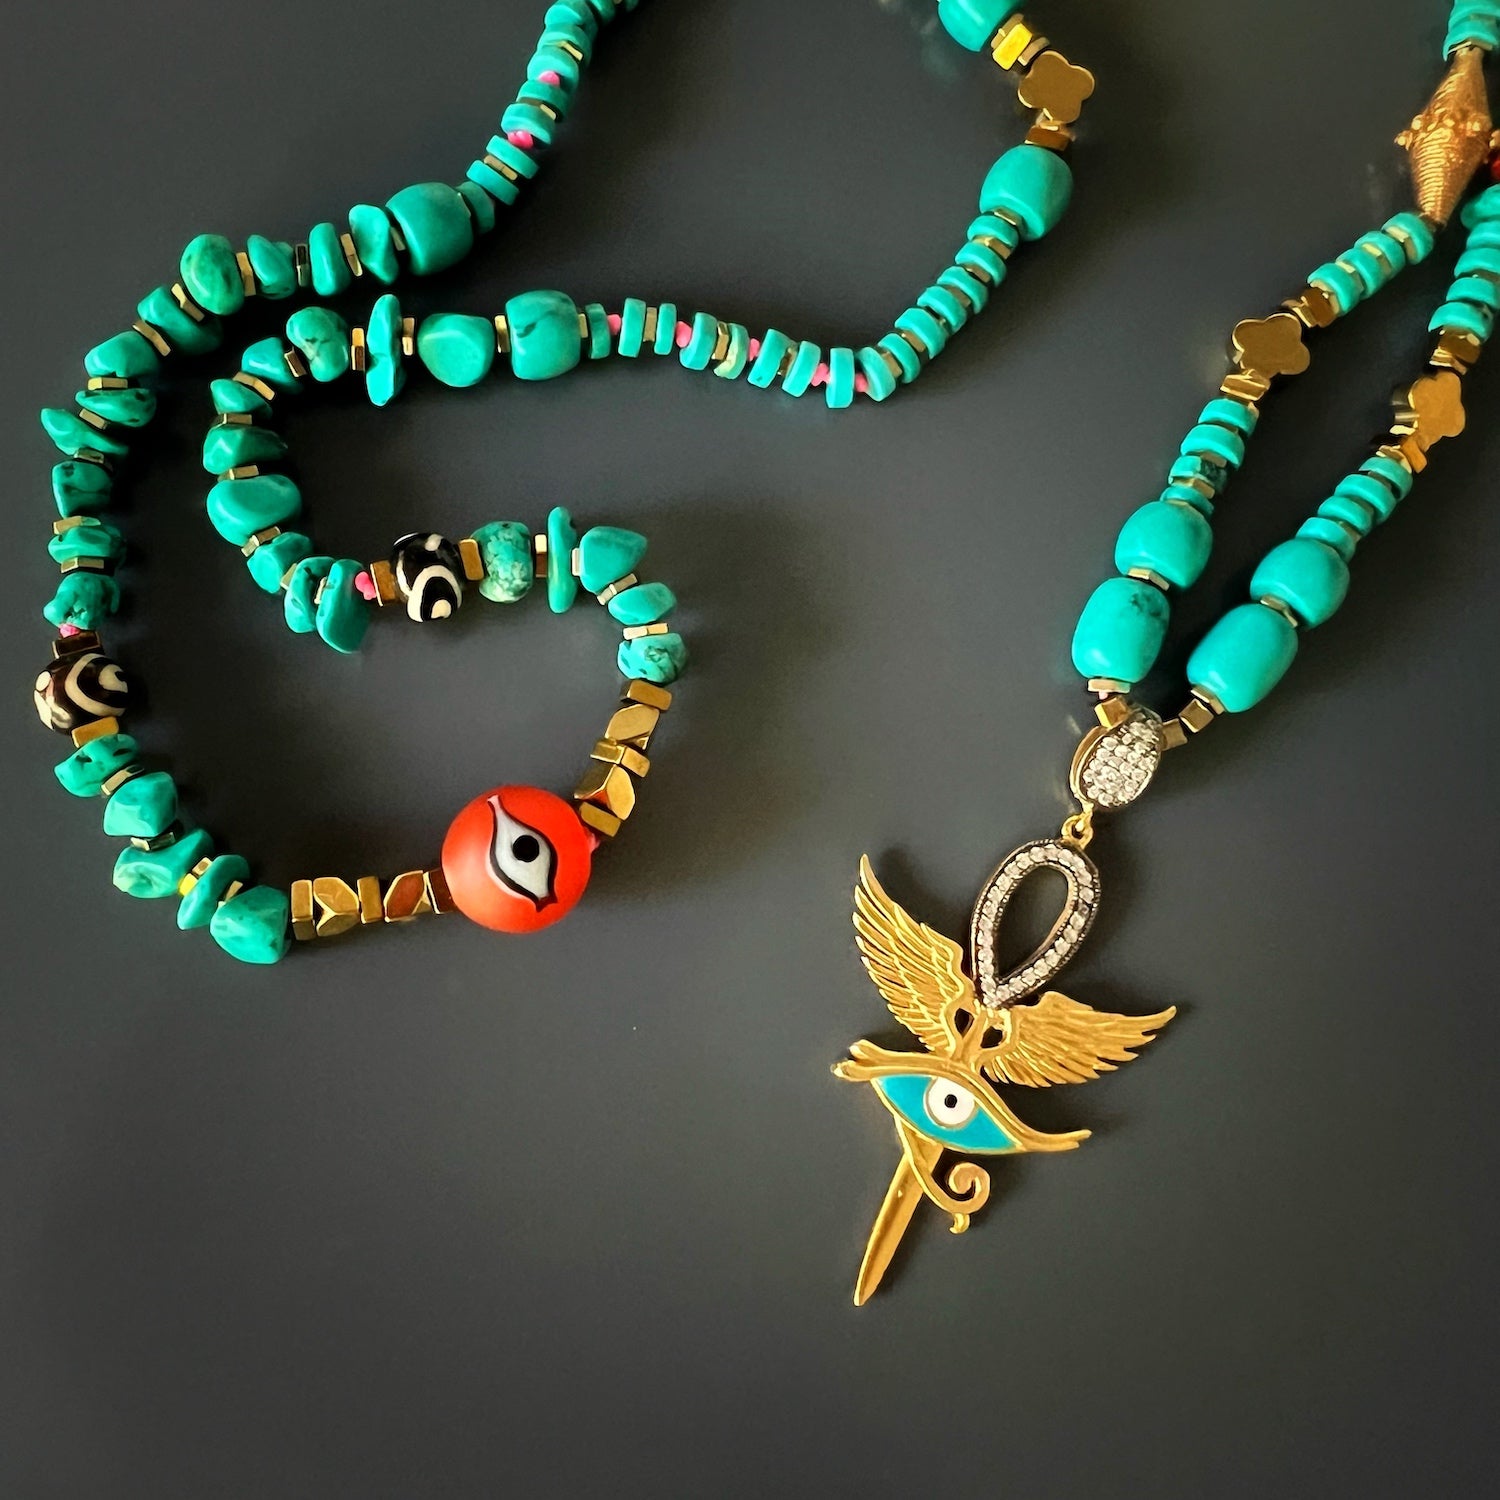 The Unique Eye of Horus Turquoise Necklace, a beautiful and meaningful accessory for those seeking cultural and spiritual significance